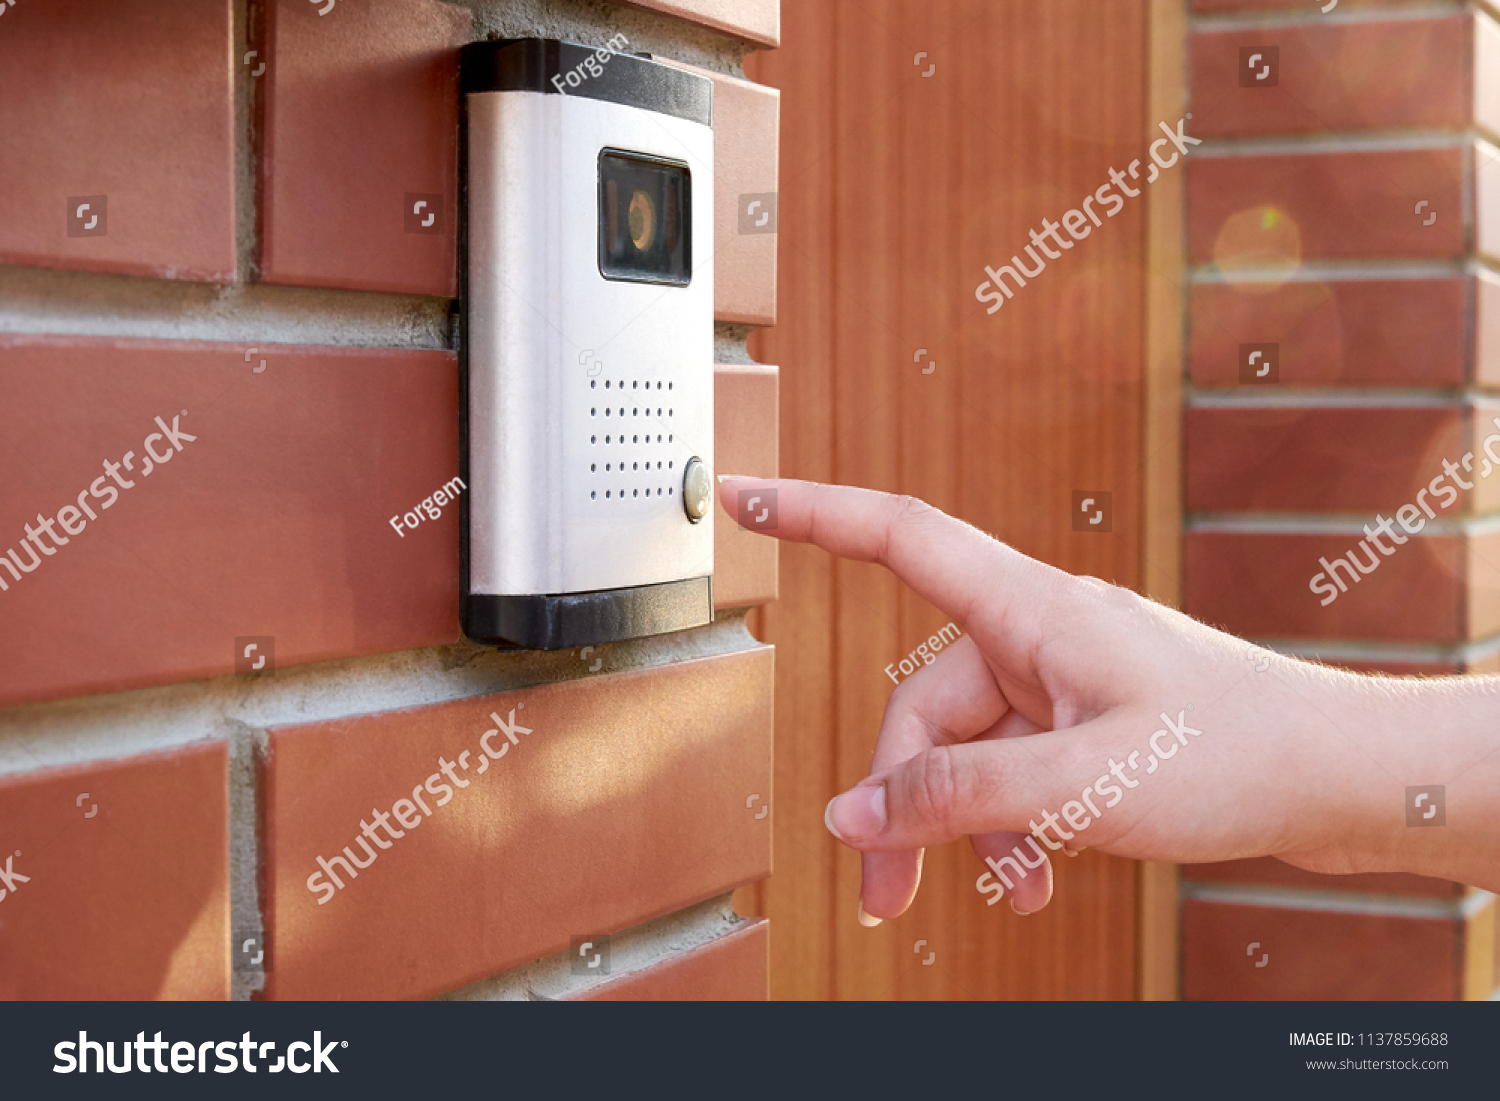 The female hand presses a button doorbell with camera and intercom #1137859688